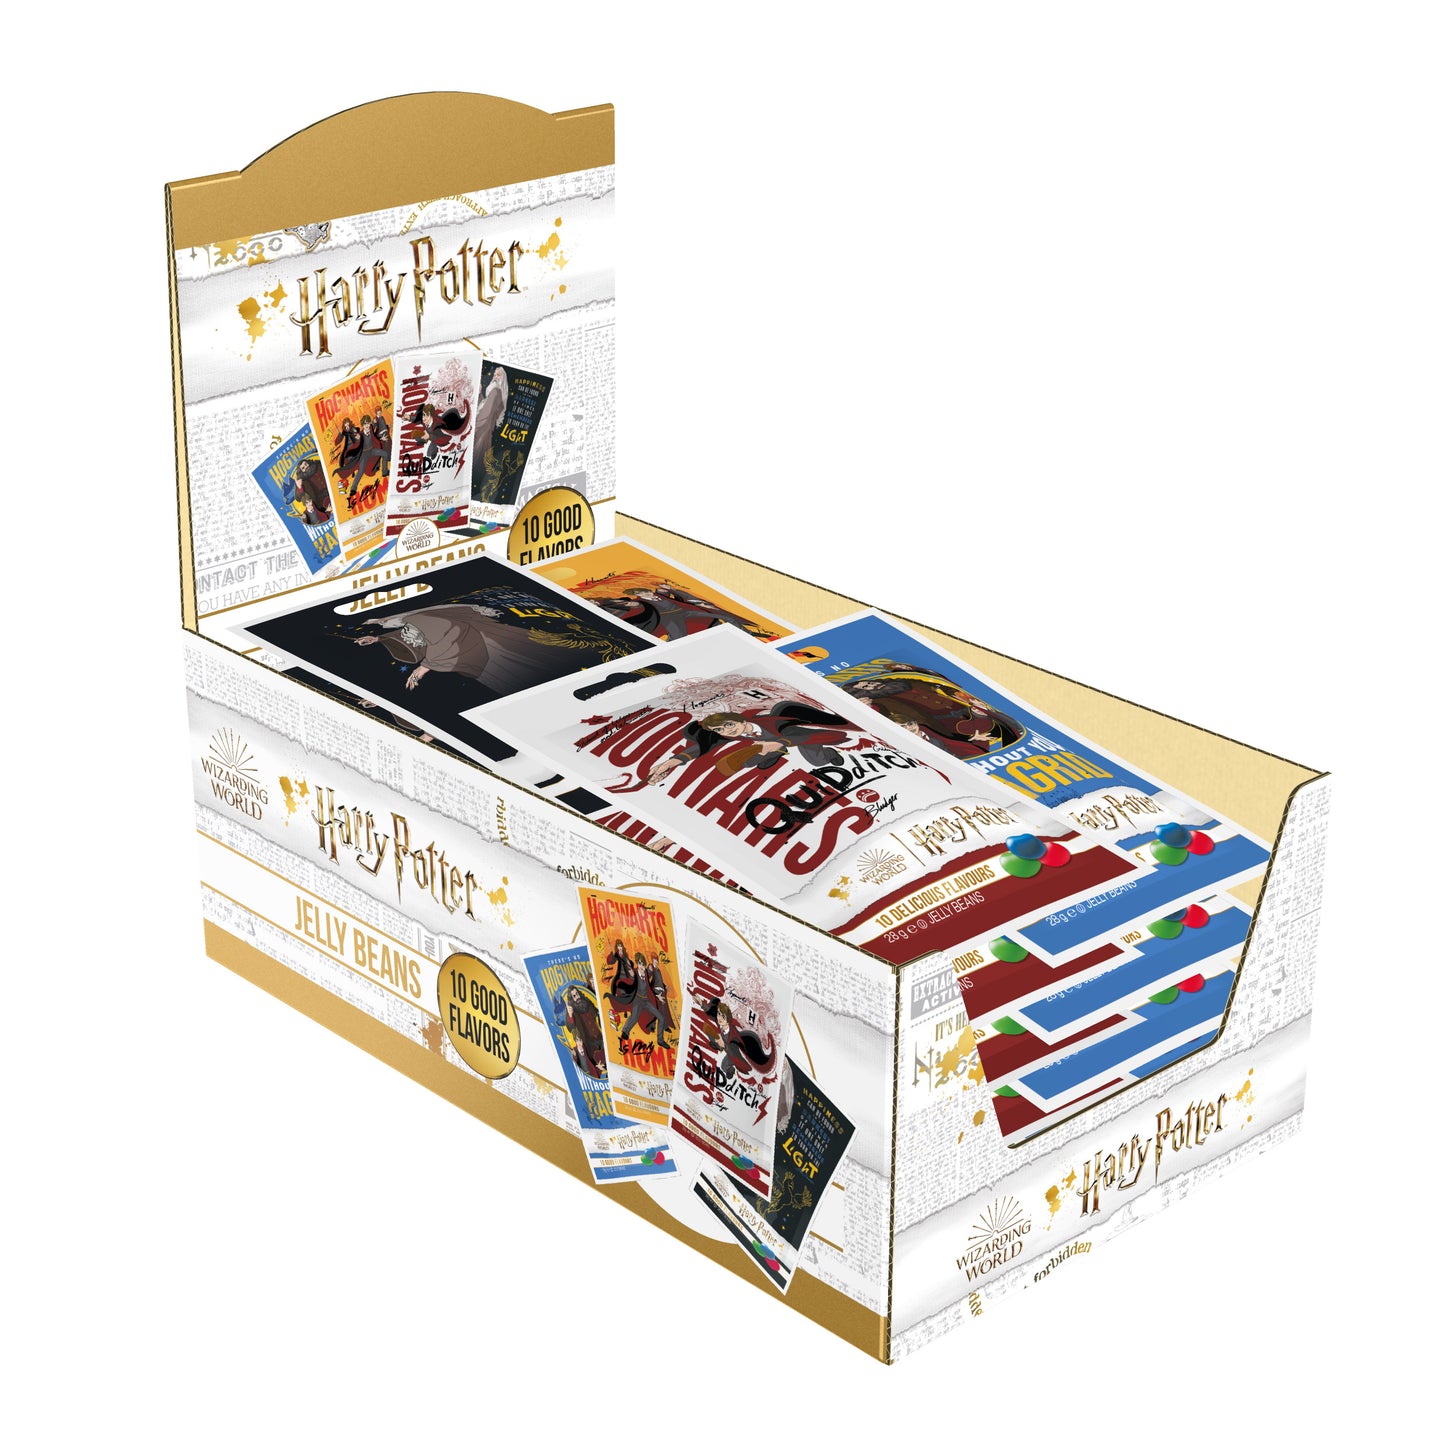 Harry Potter Candies with 10 Flavours 28g